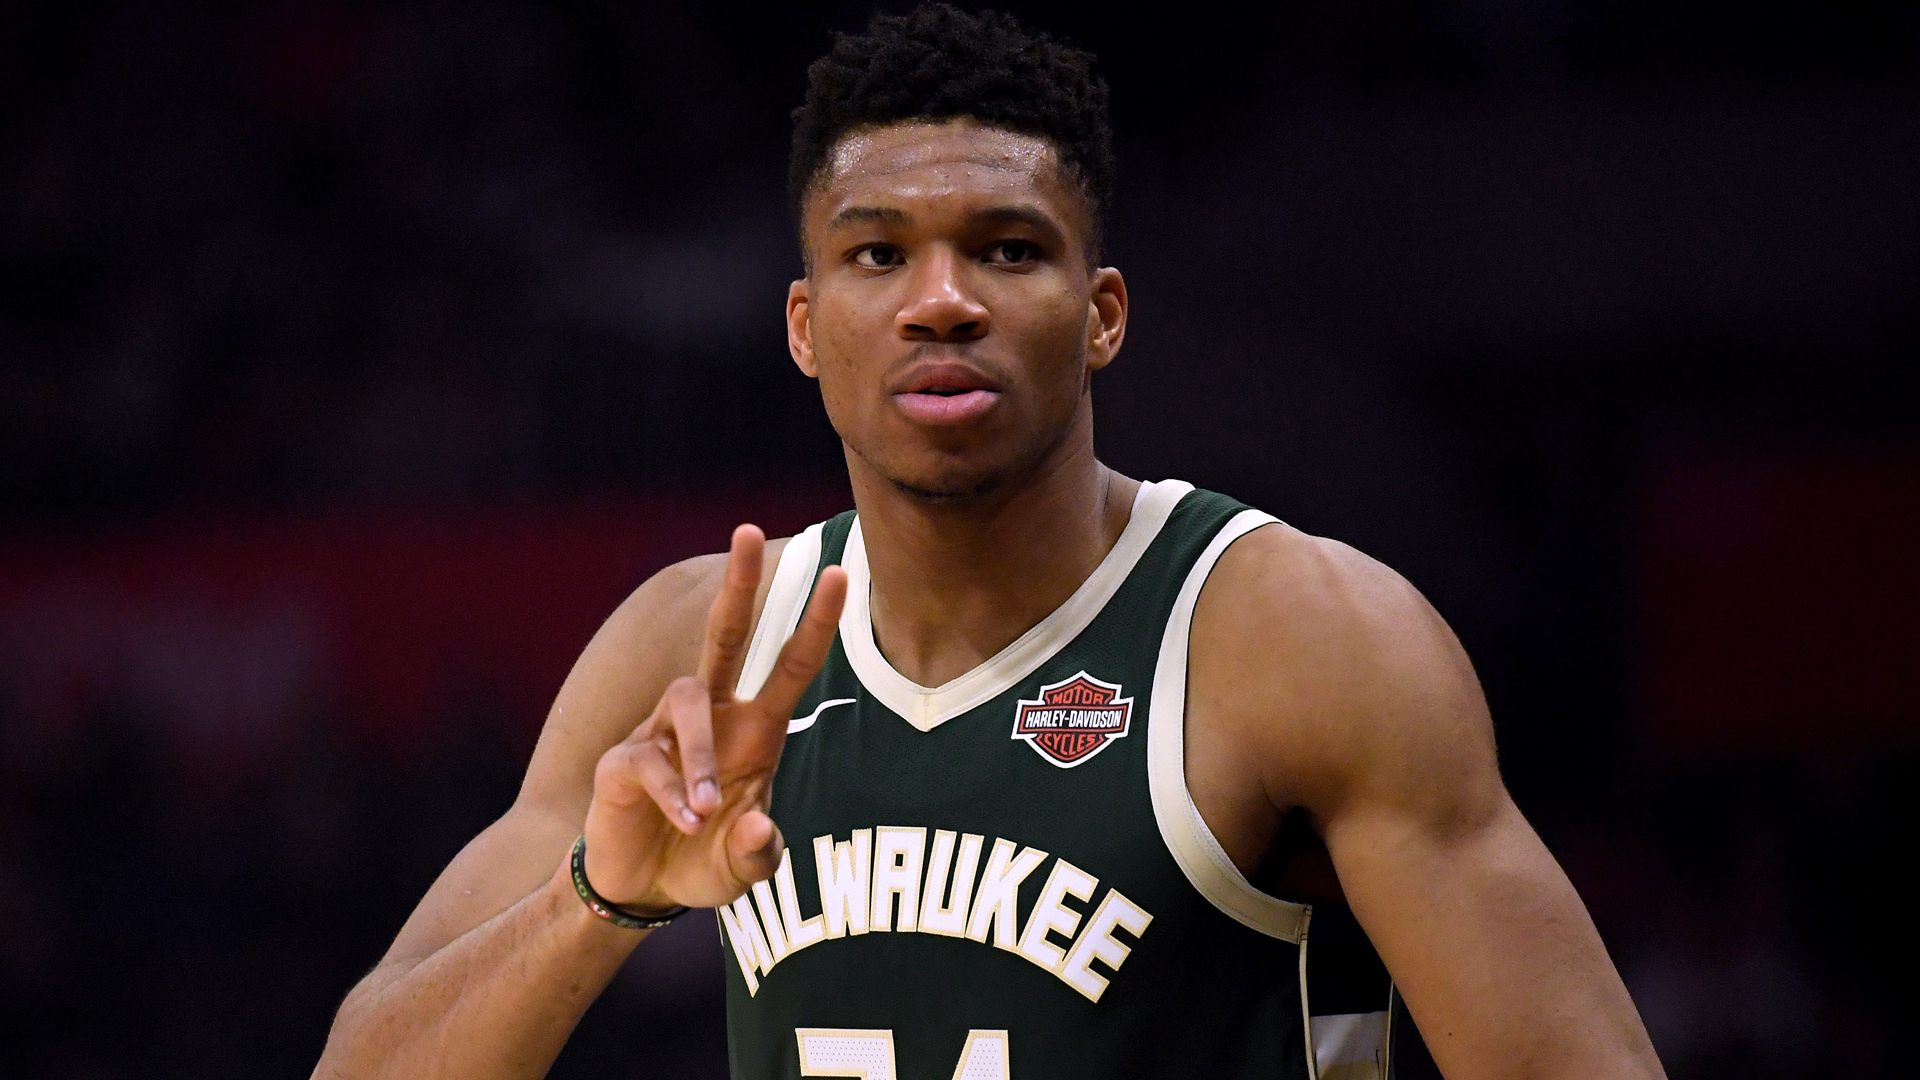 He fell just short of another double-double, but Milwaukee Bucks star Giannis Antetokounmpo was not worried.